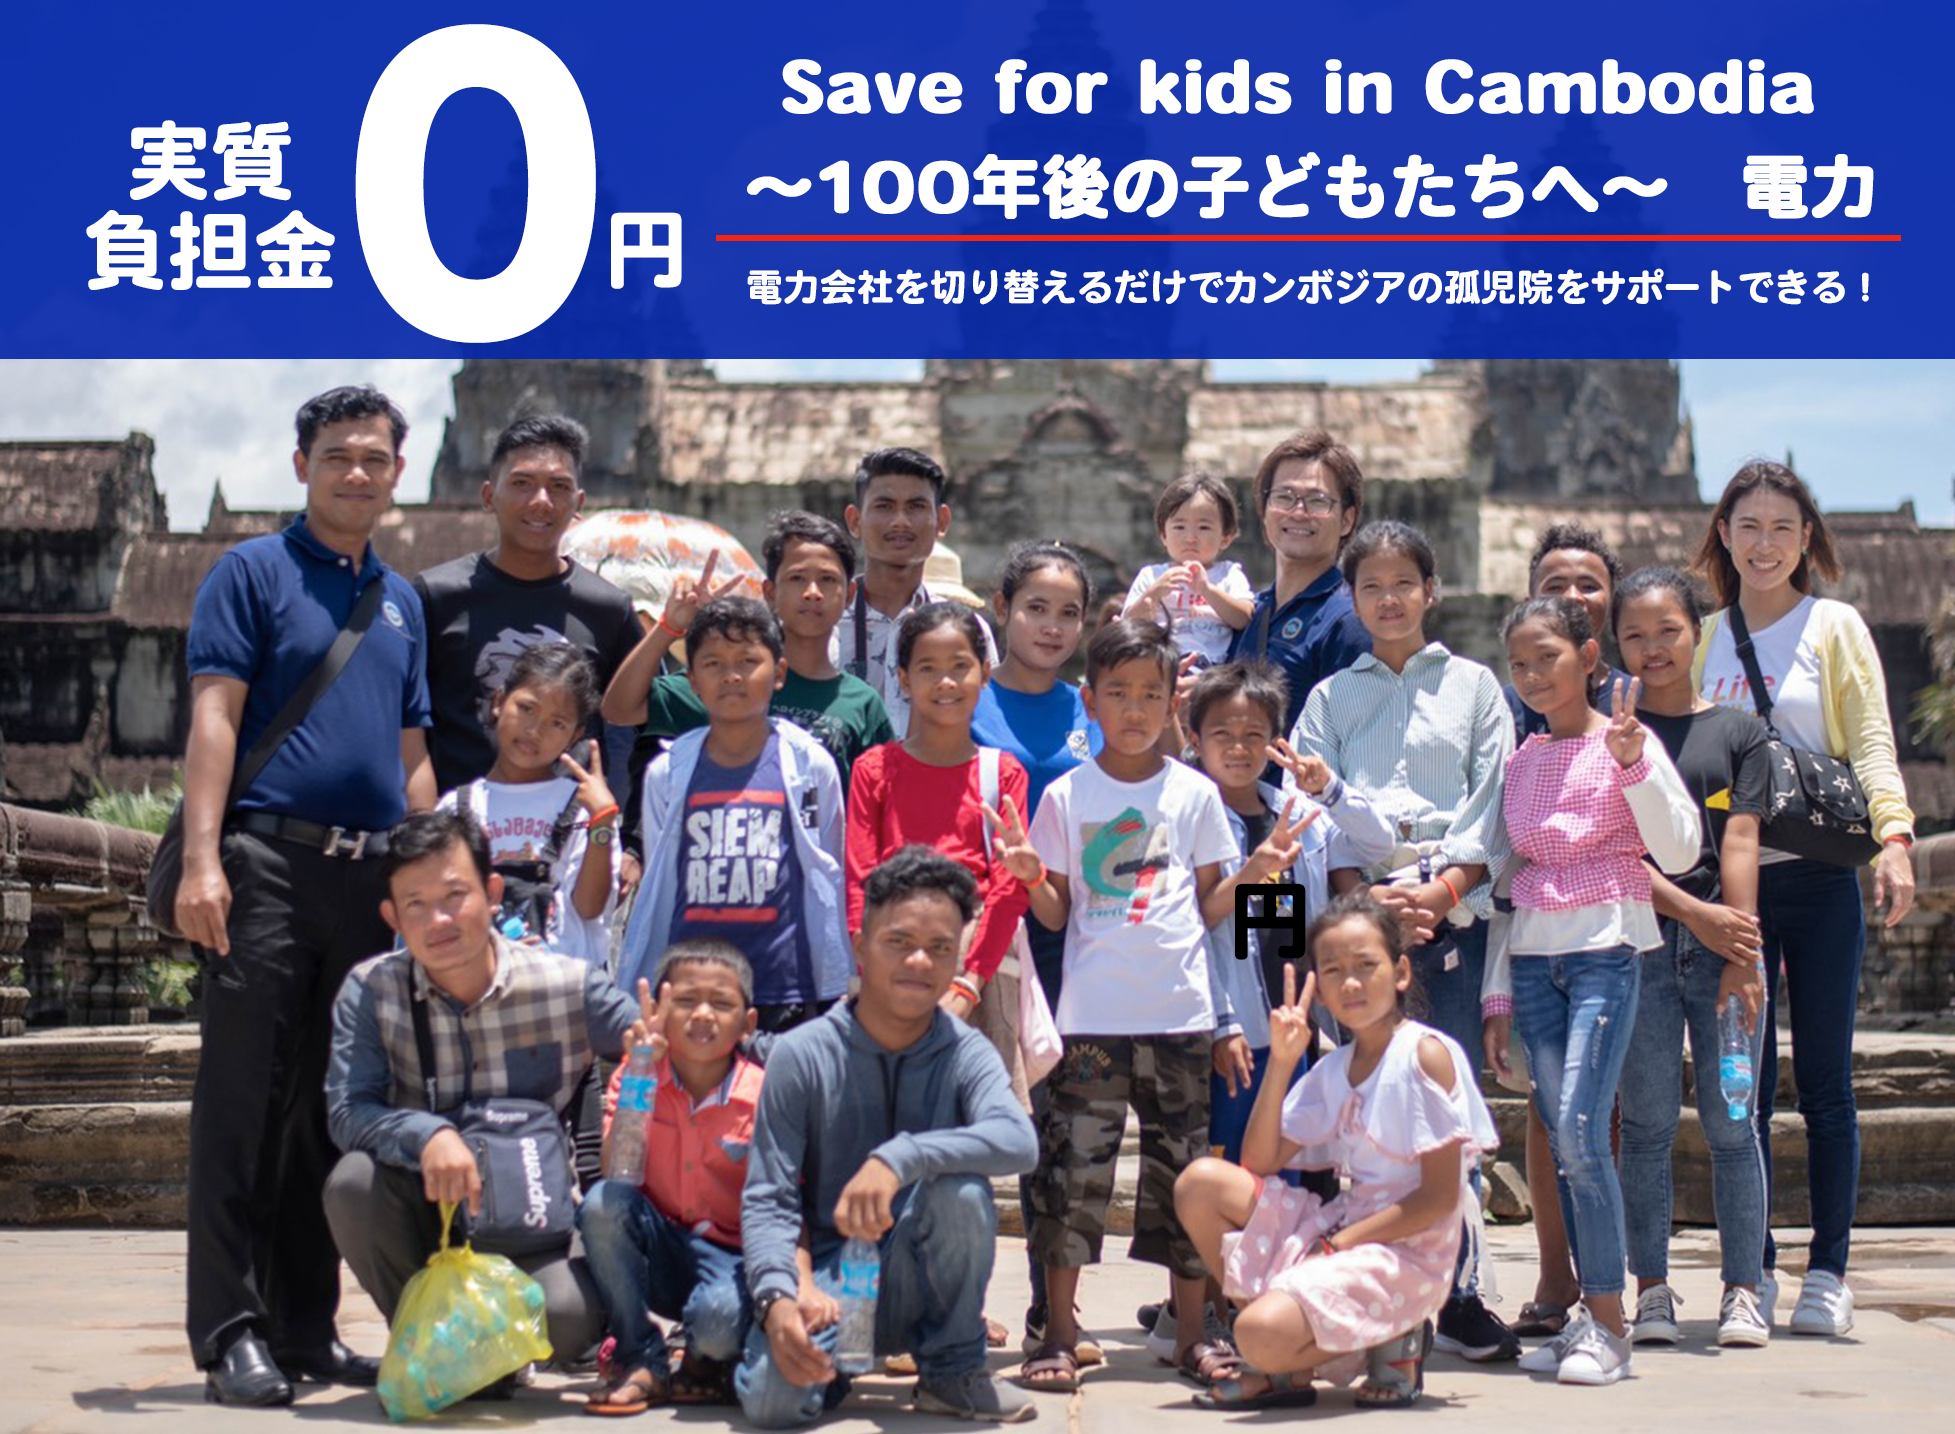 Save for kids in Cambodia 〜100年後の子どもたちへ〜　電力